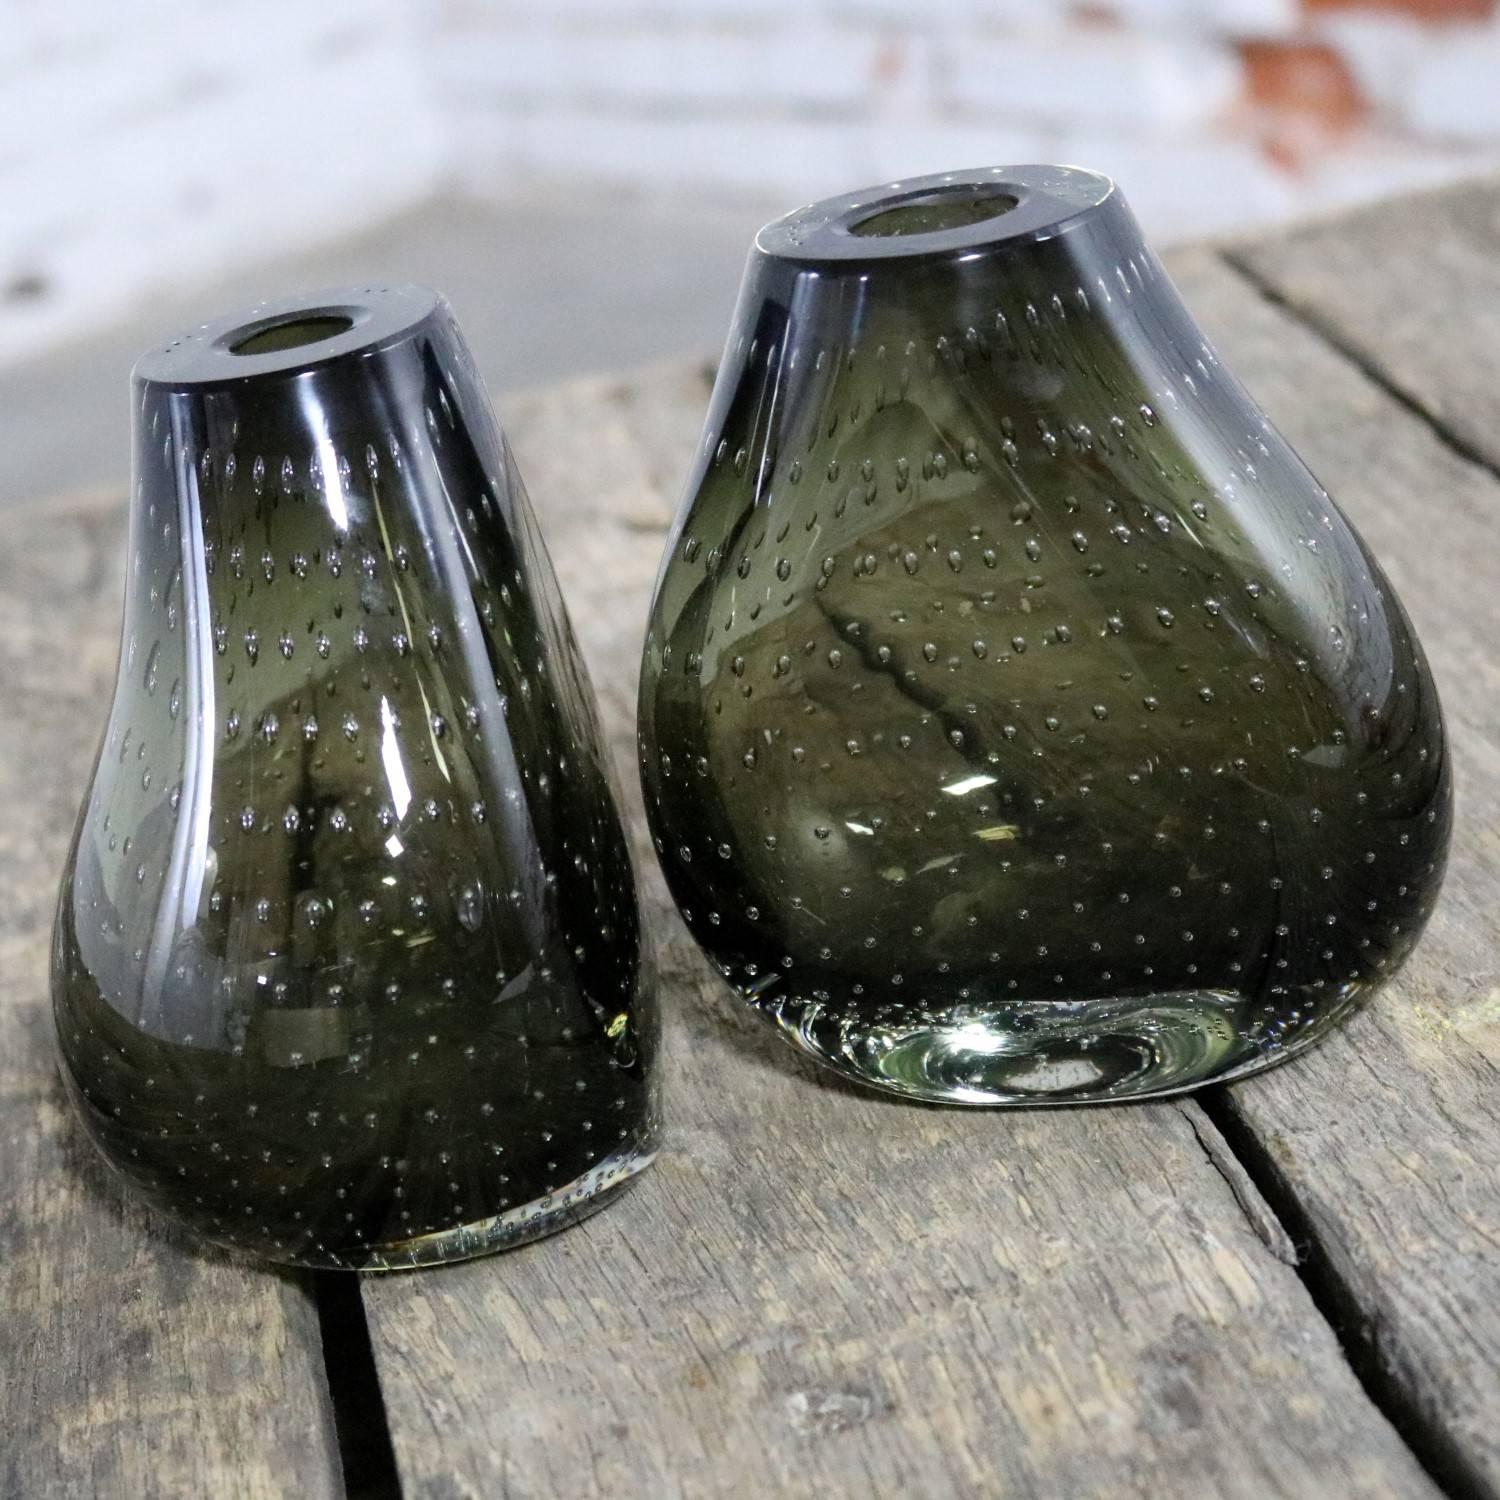 Wonderful pair of Mid-Century Modern controlled bubble blown art glass bookend vases designed by Carl Erickson for Erickson Glassworks. This pair is in tremendously good condition with no chips, cracks, or chiggers, circa 1950s.

These can be